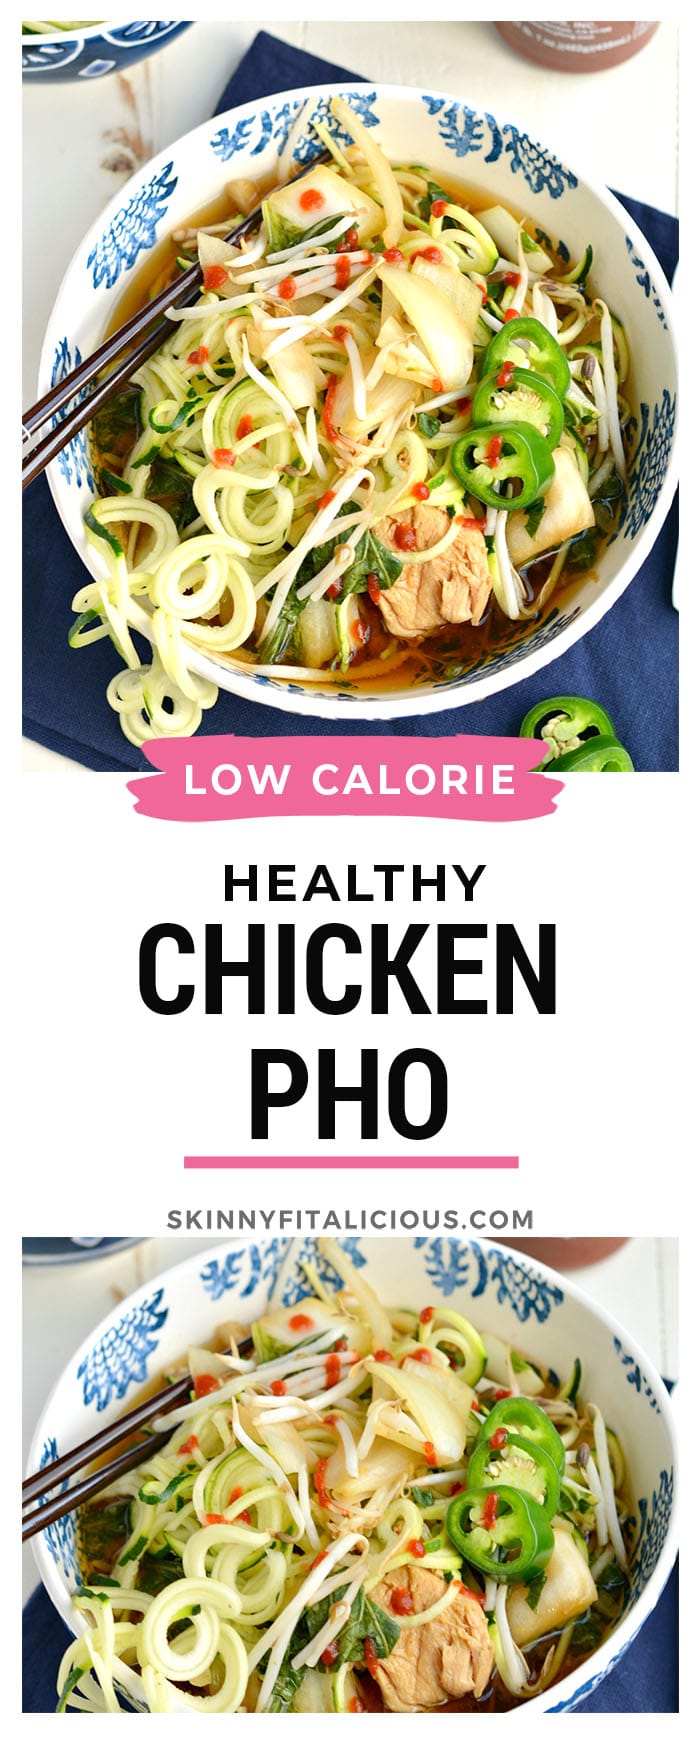 Chicken Zoodle Pho made super simple in the crockpot and topped with spiralized zucchini noodles for a healthy version of a restaurant favorite. Make takeout easy at home with a comforting bowl of this gluten free and low calorie soup!